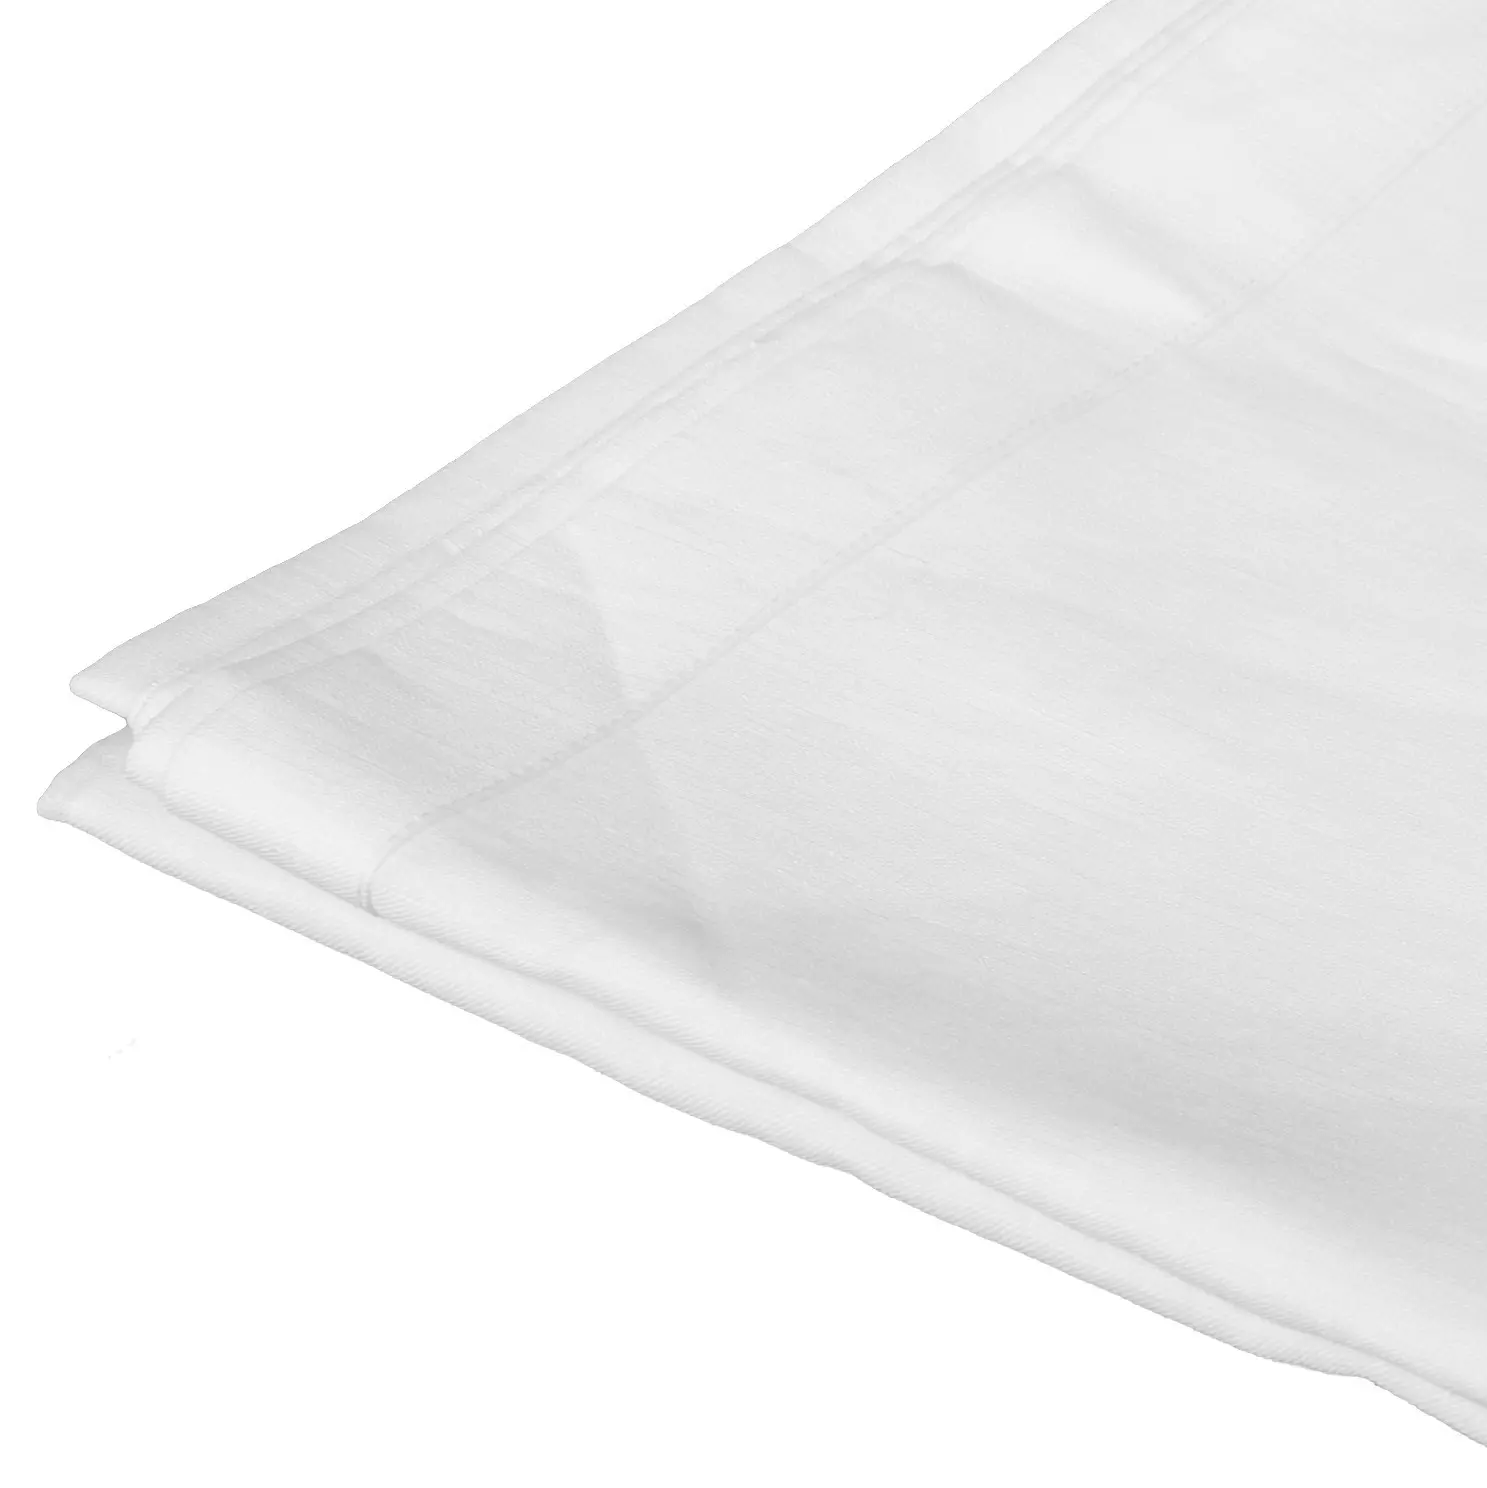 tweeto babybed canopy - 100% linen - white